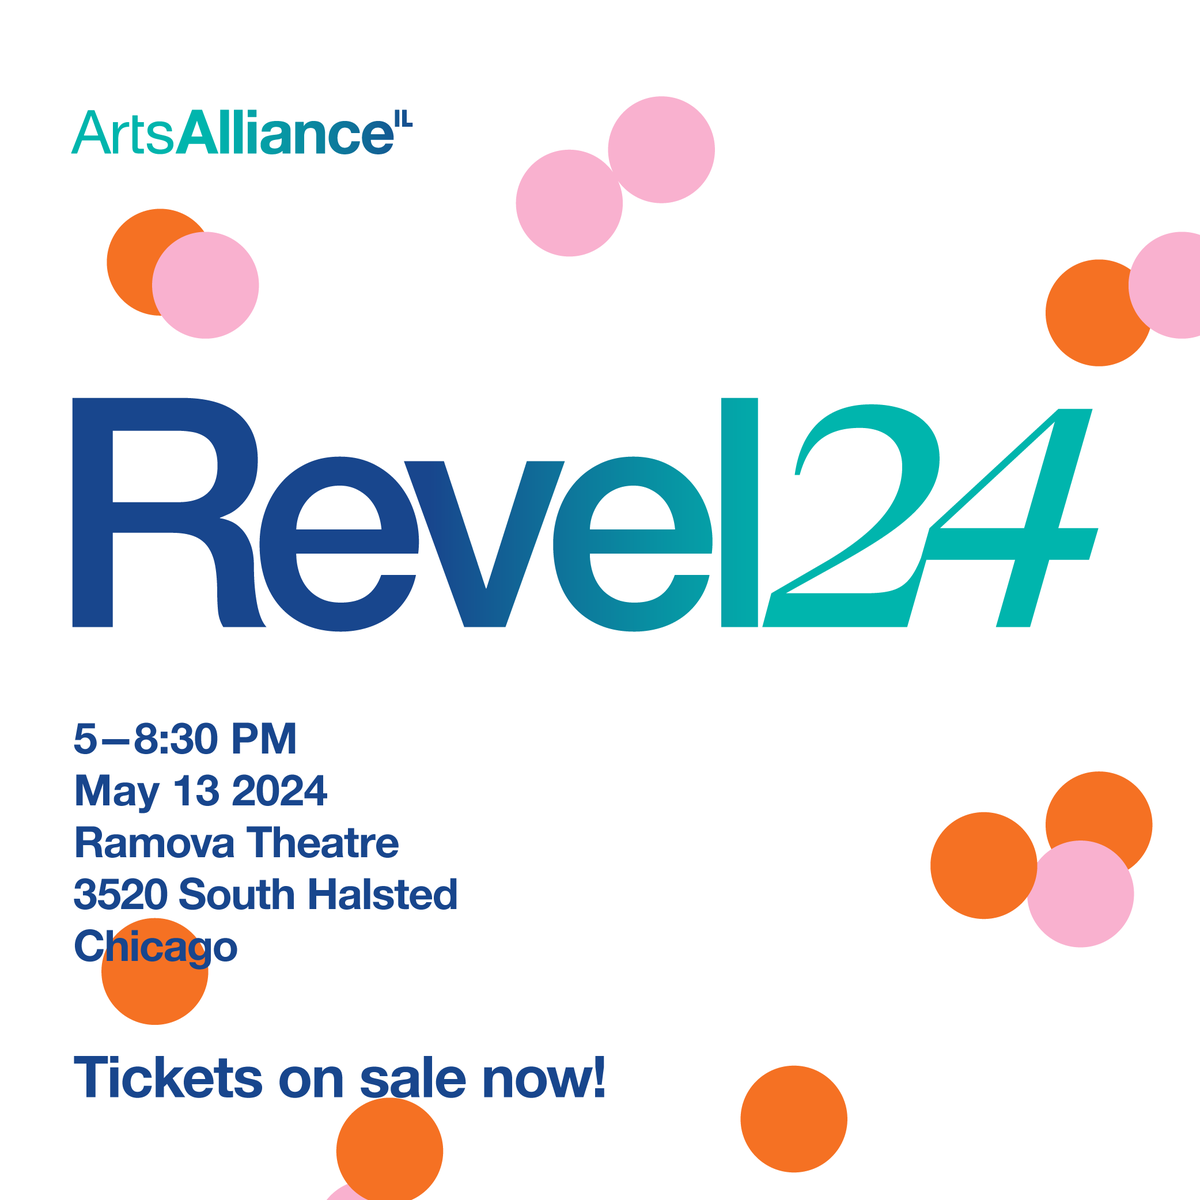 On sale now: Join Arts Alliance at the Ramova Theatre in Chicago on May 13 from 5-8:30PM for Revel! Purchase tickets, view sponsorship information, and more at artsalliance.org/revel24/. 🎉🎊🎉